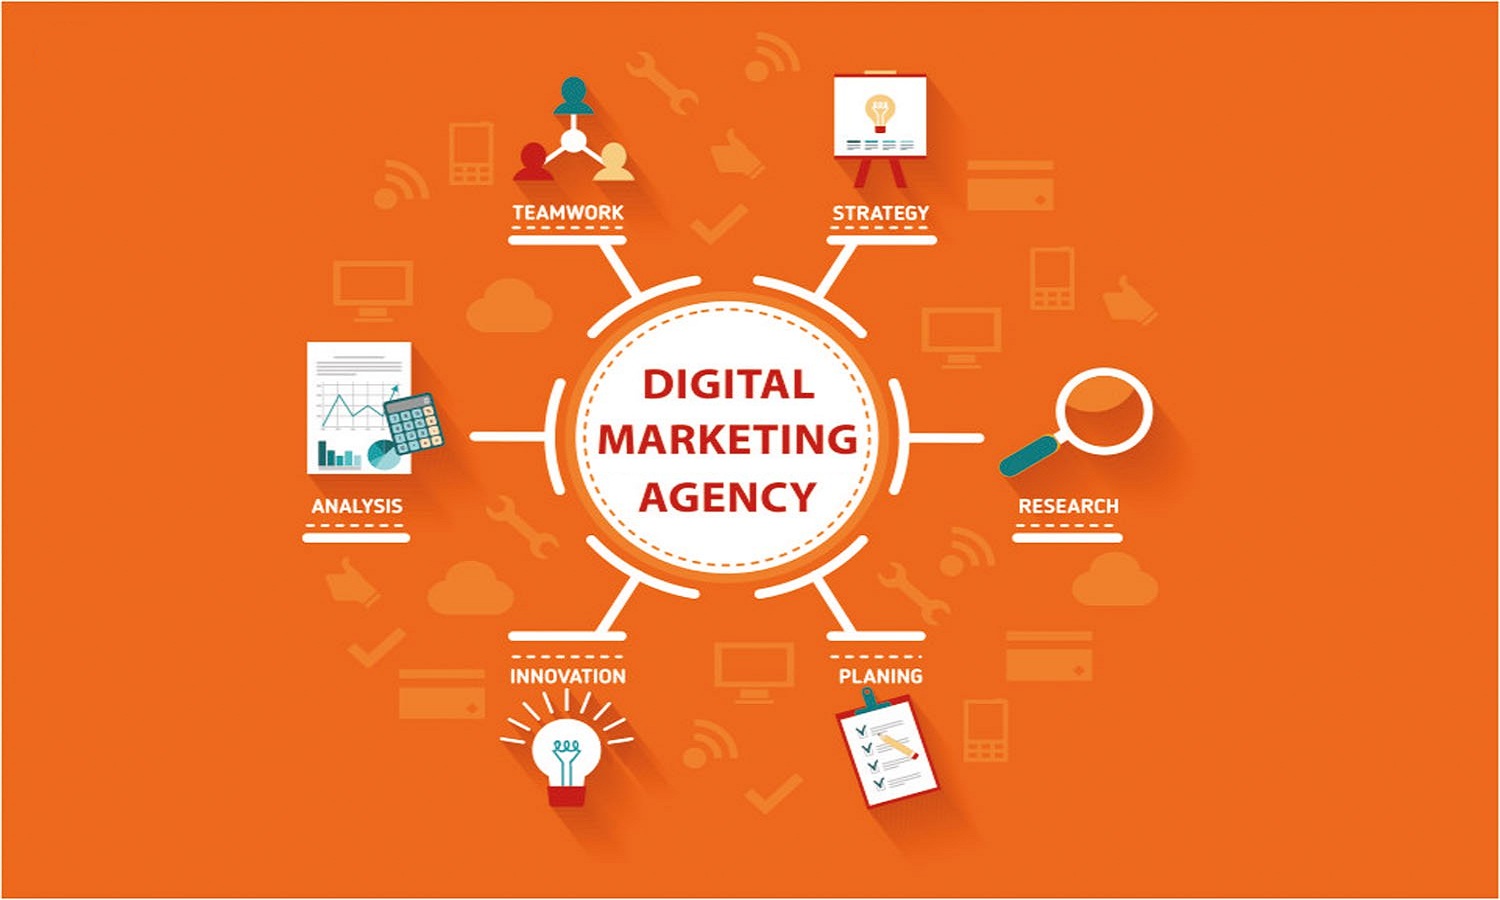 Digital Marketing Agency: How to Choose the Best for Your Business